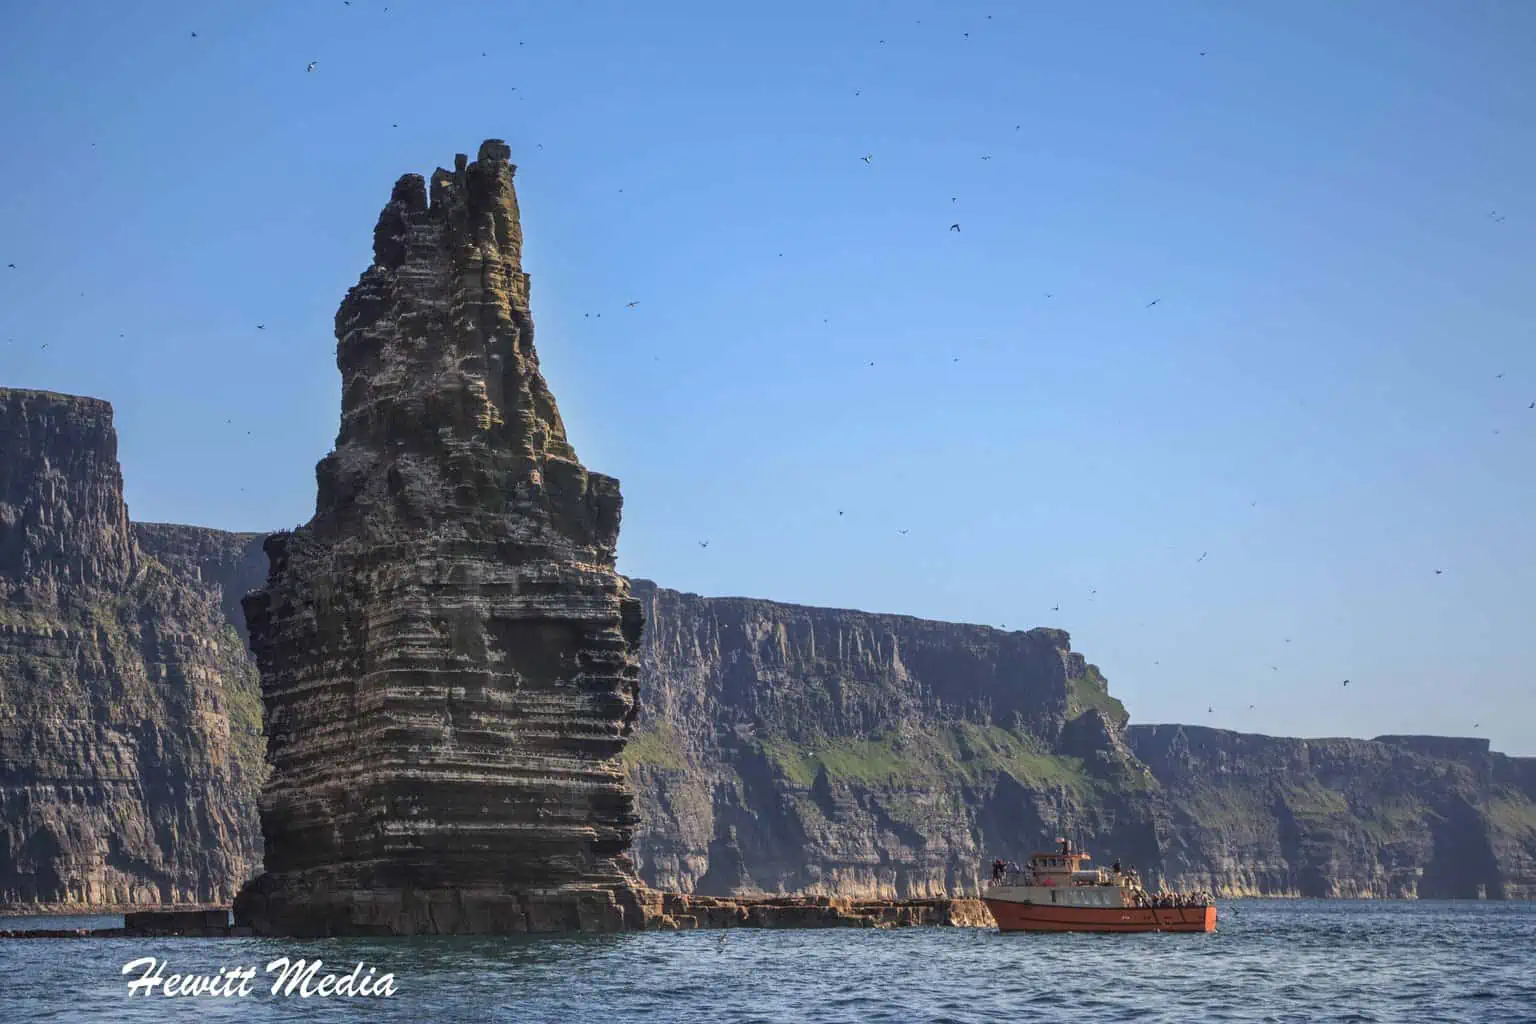 World's Most Beautiful Coasts - Cliffs of Moher